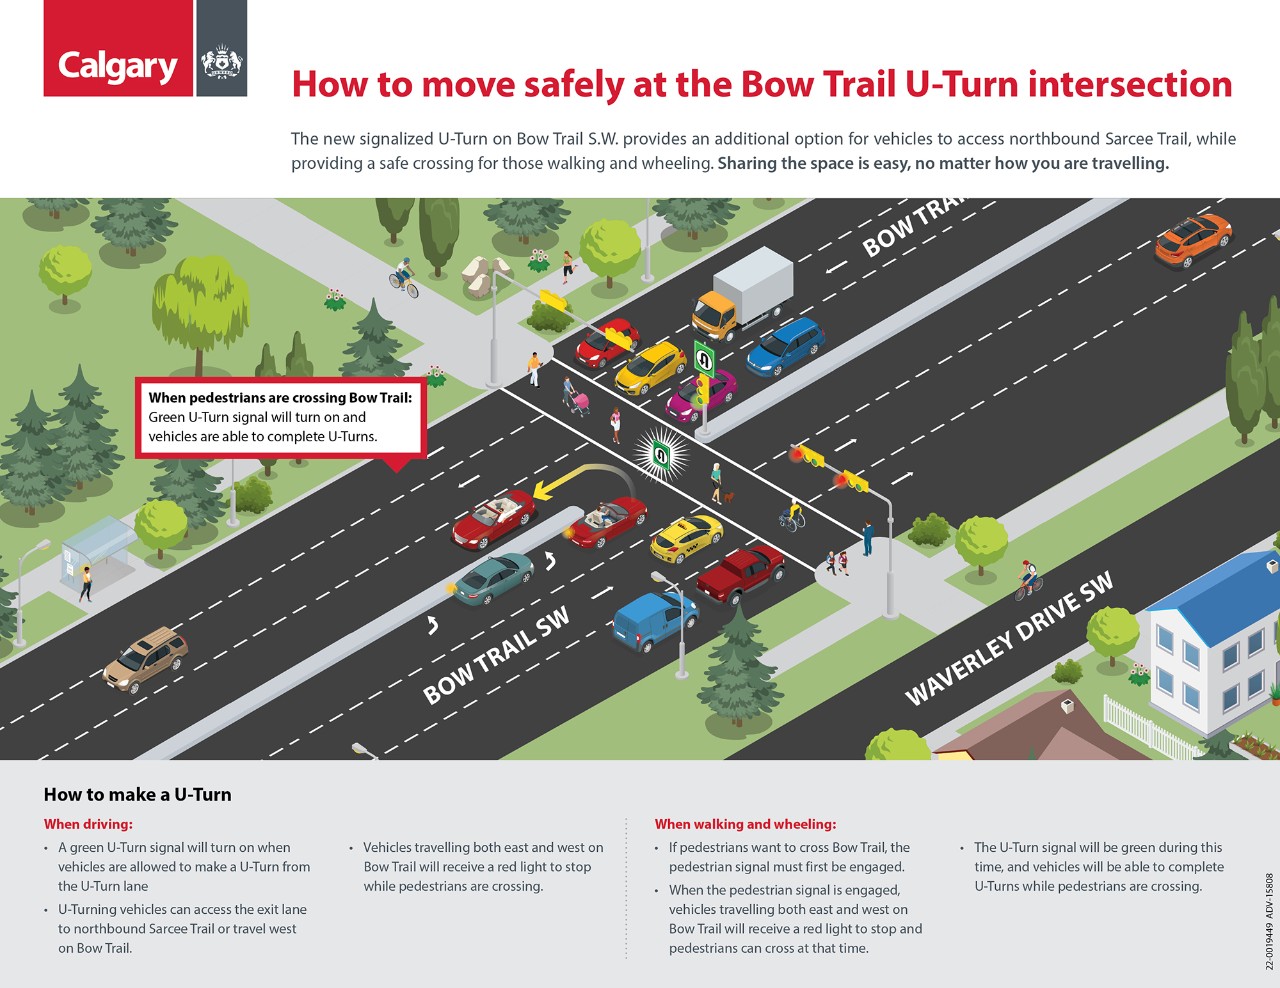 How to make a U-Turn when pedestrians are crossing